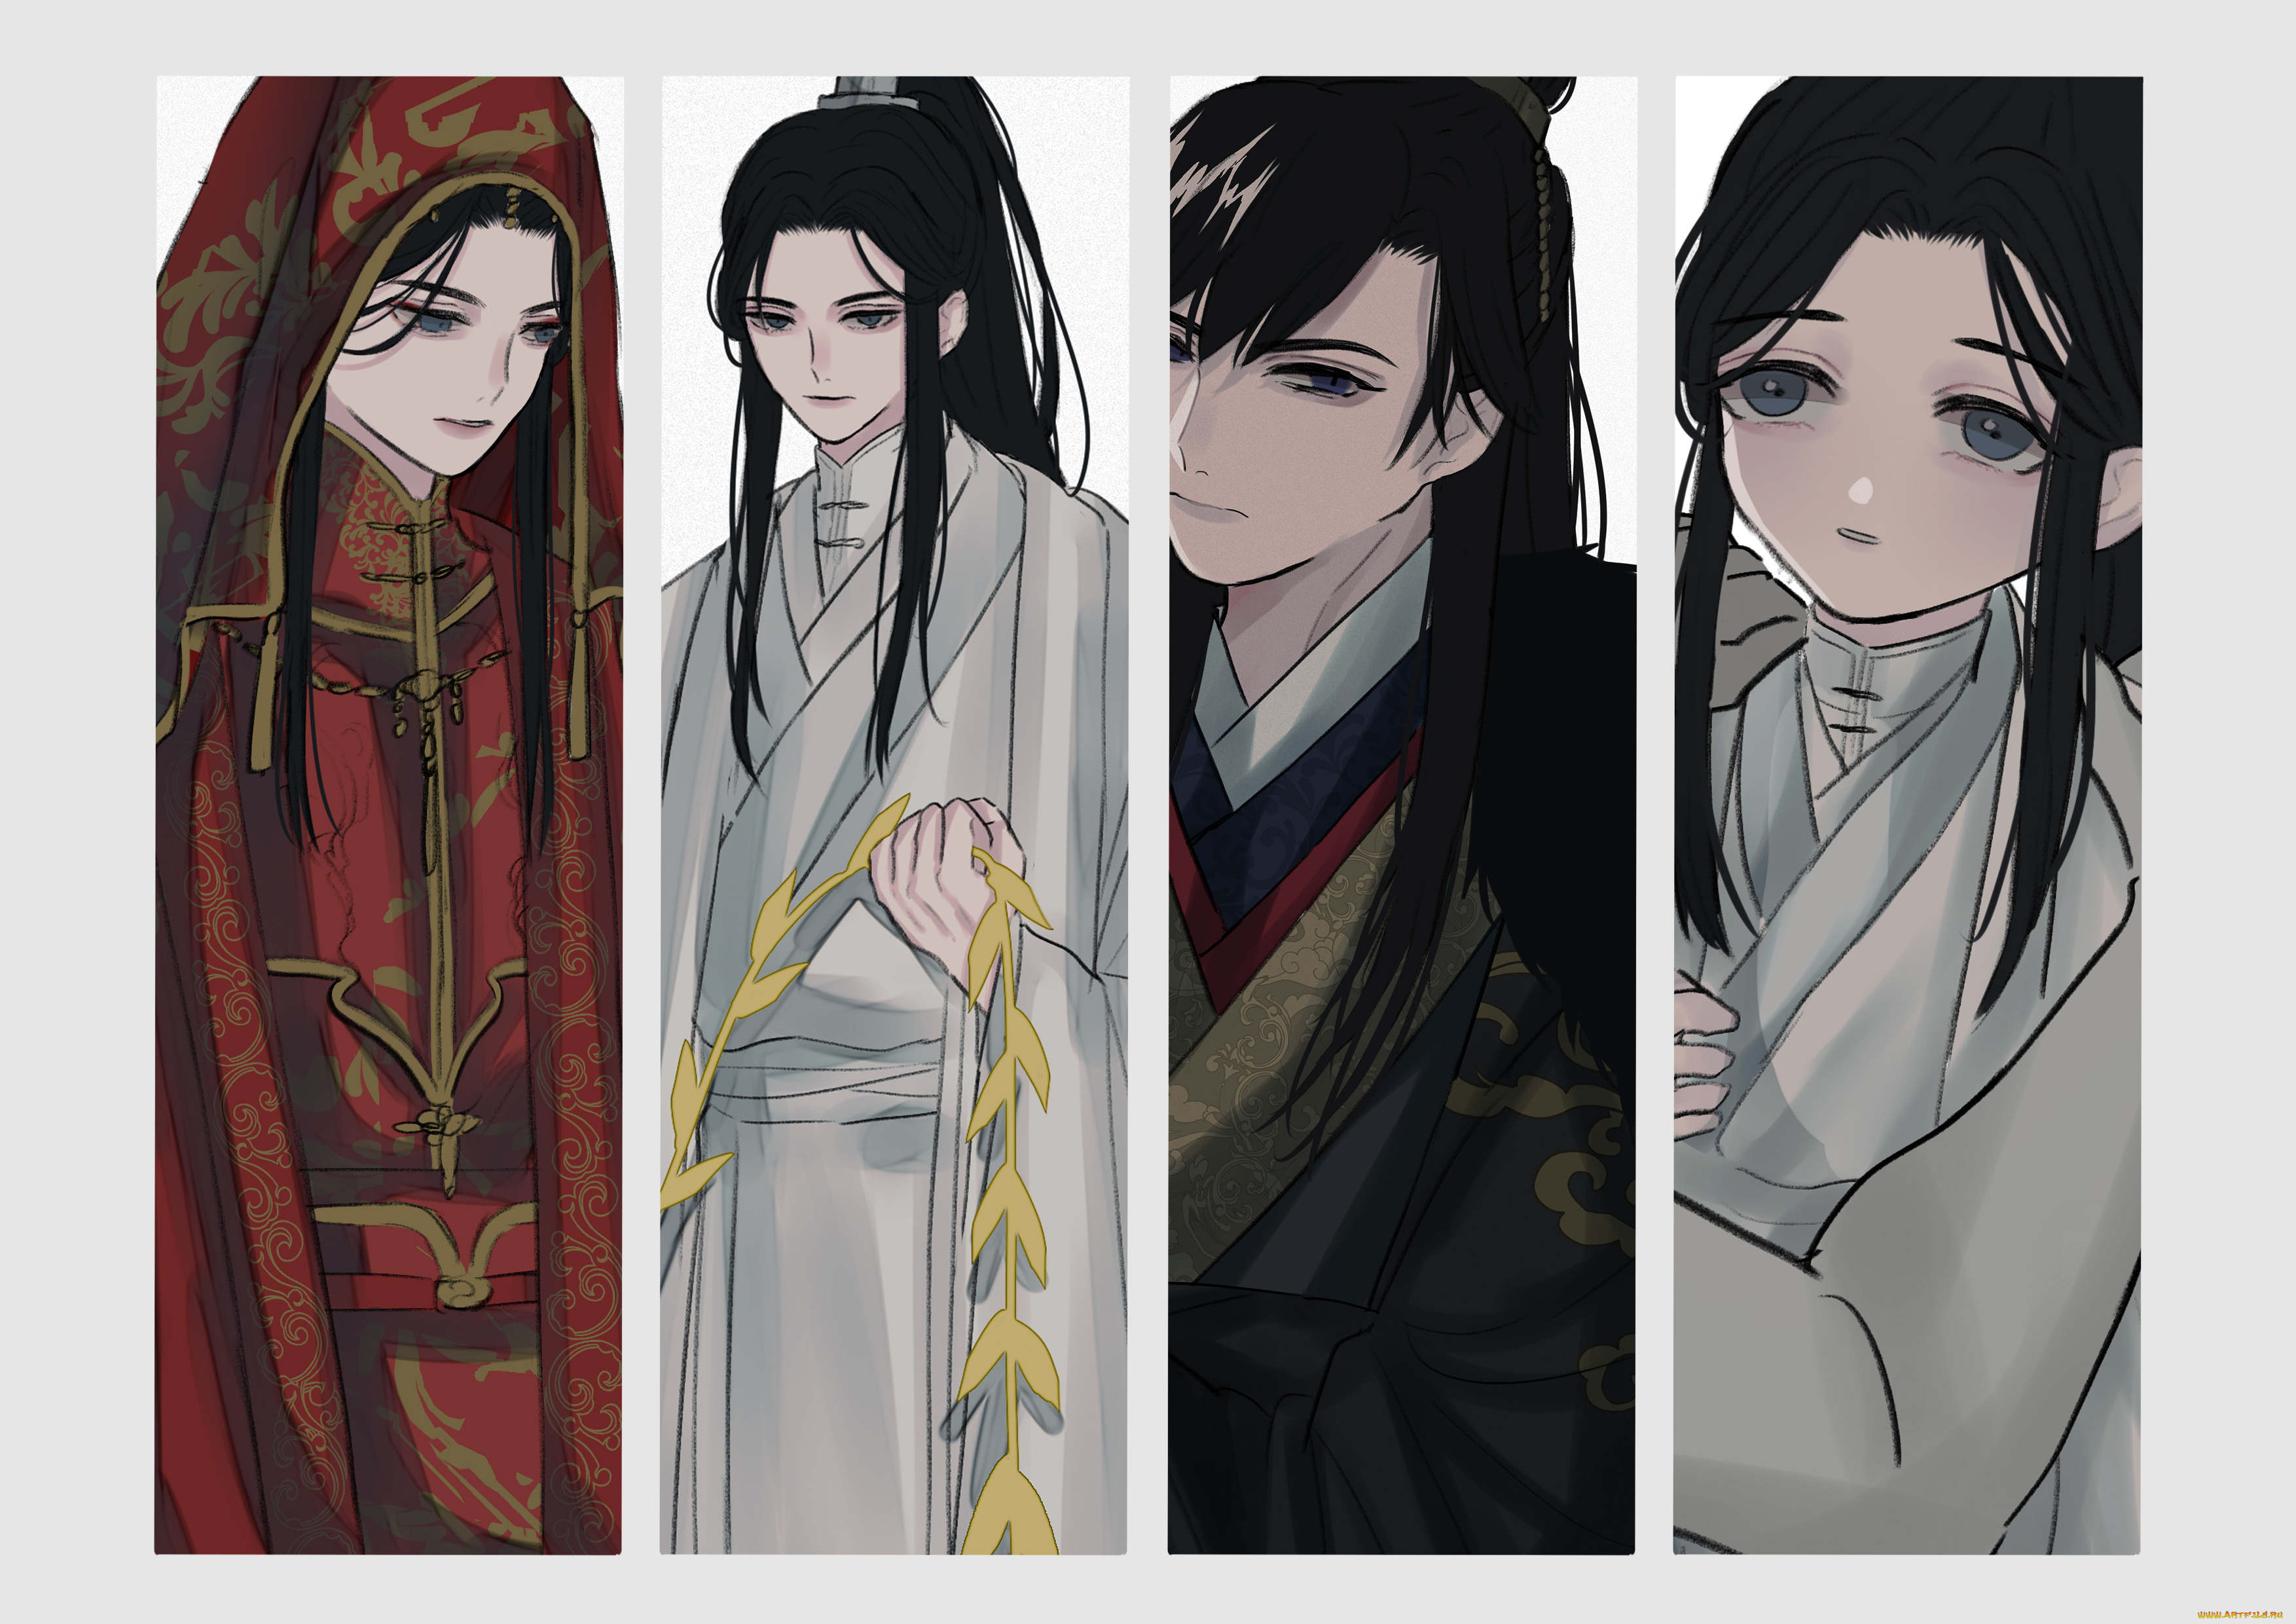 аниме, the, husky, and, his, white, cat, shizun, the, husky, and, his, white, cat, shizun